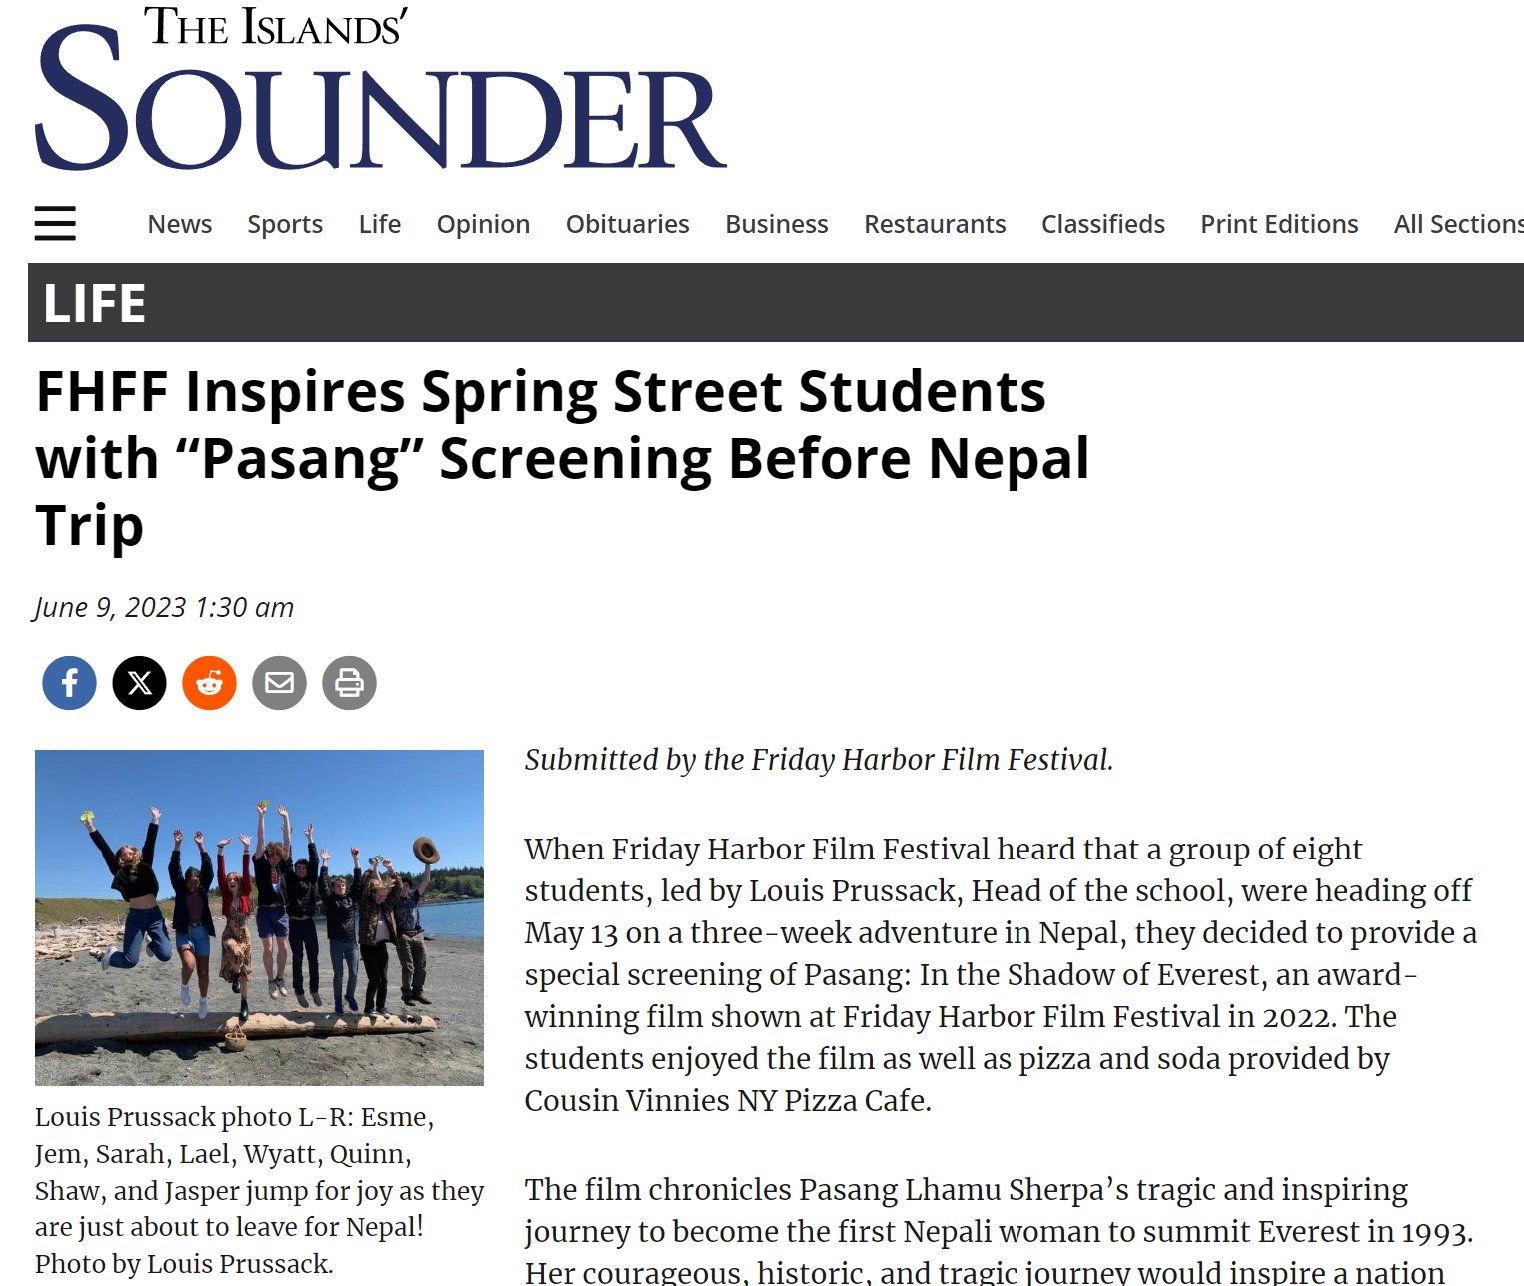 a story about the PASANG movie screening for a group of students climbing Nepal was featuried in the Islands" Sounder in 2023.